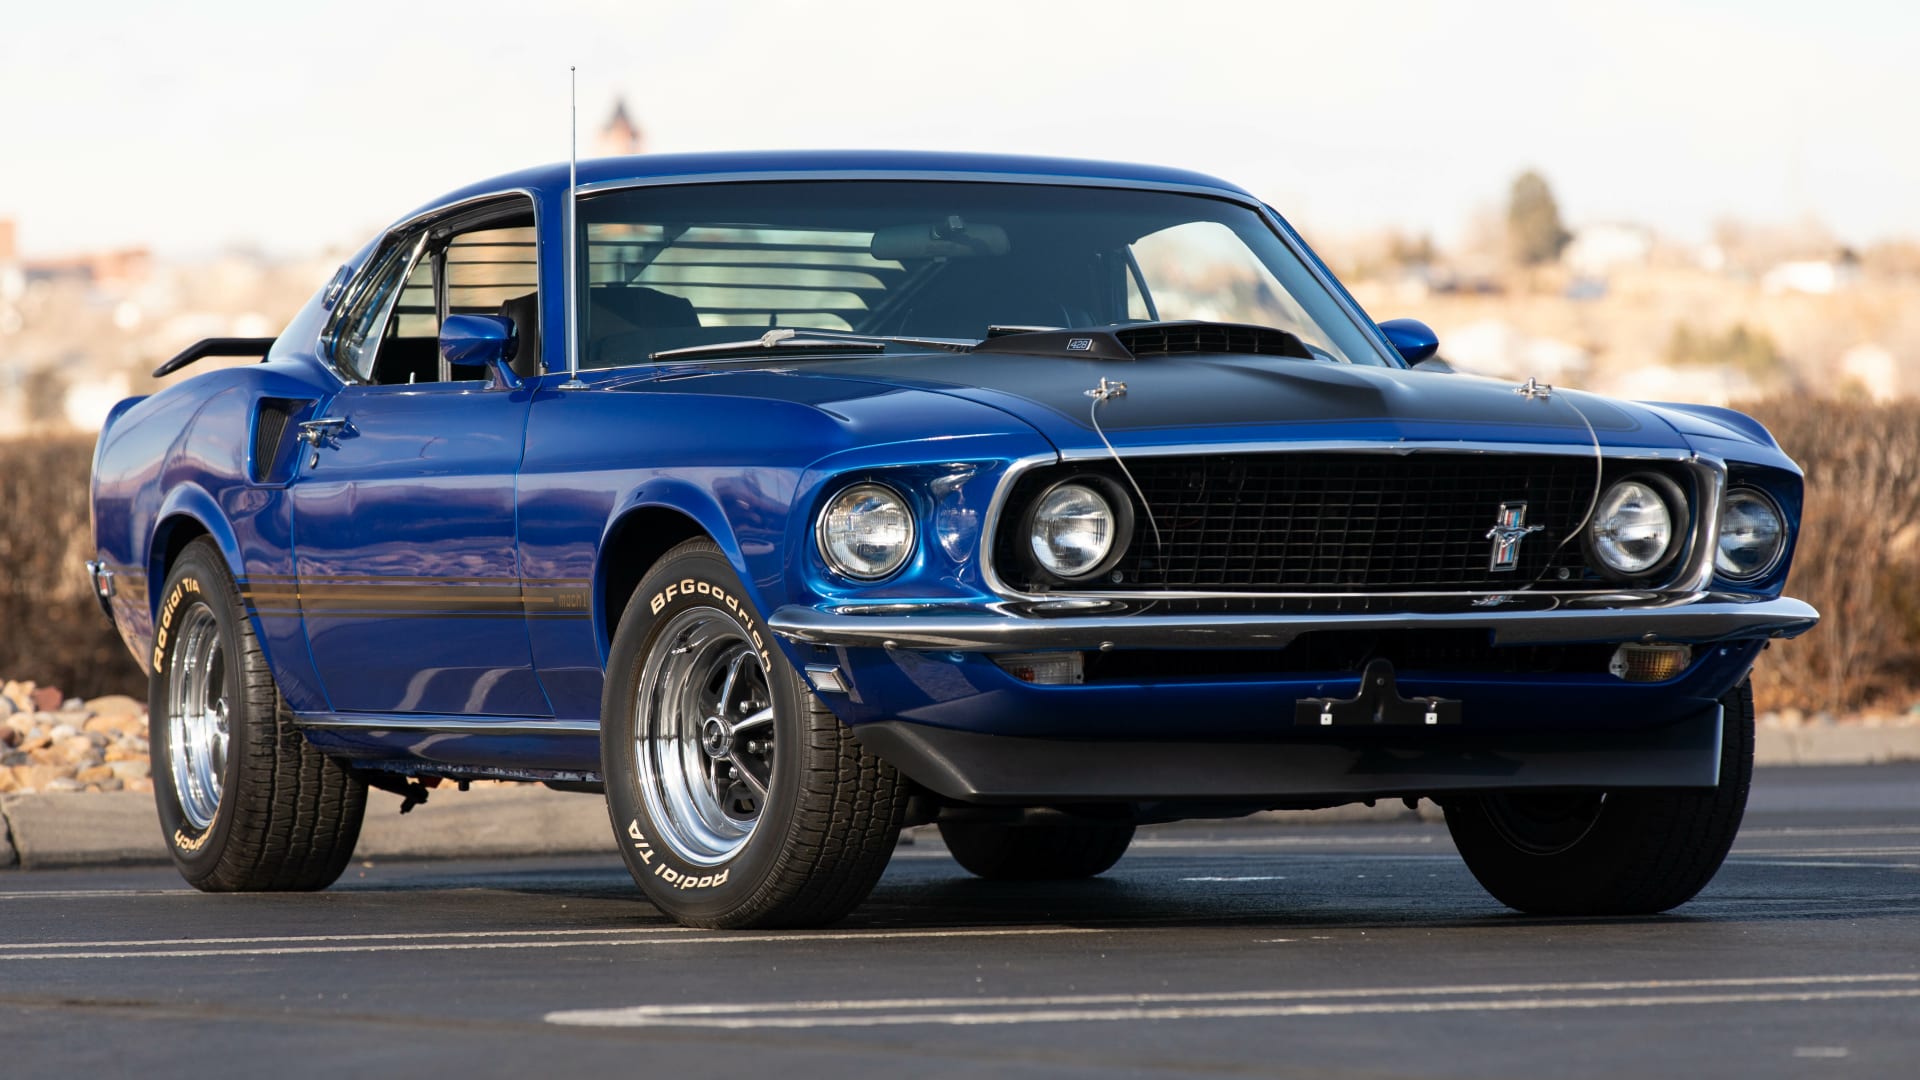 1969 Ford Mustang Mach 1 Fastback at Glendale 2022 as F189 - Mecum Auctions